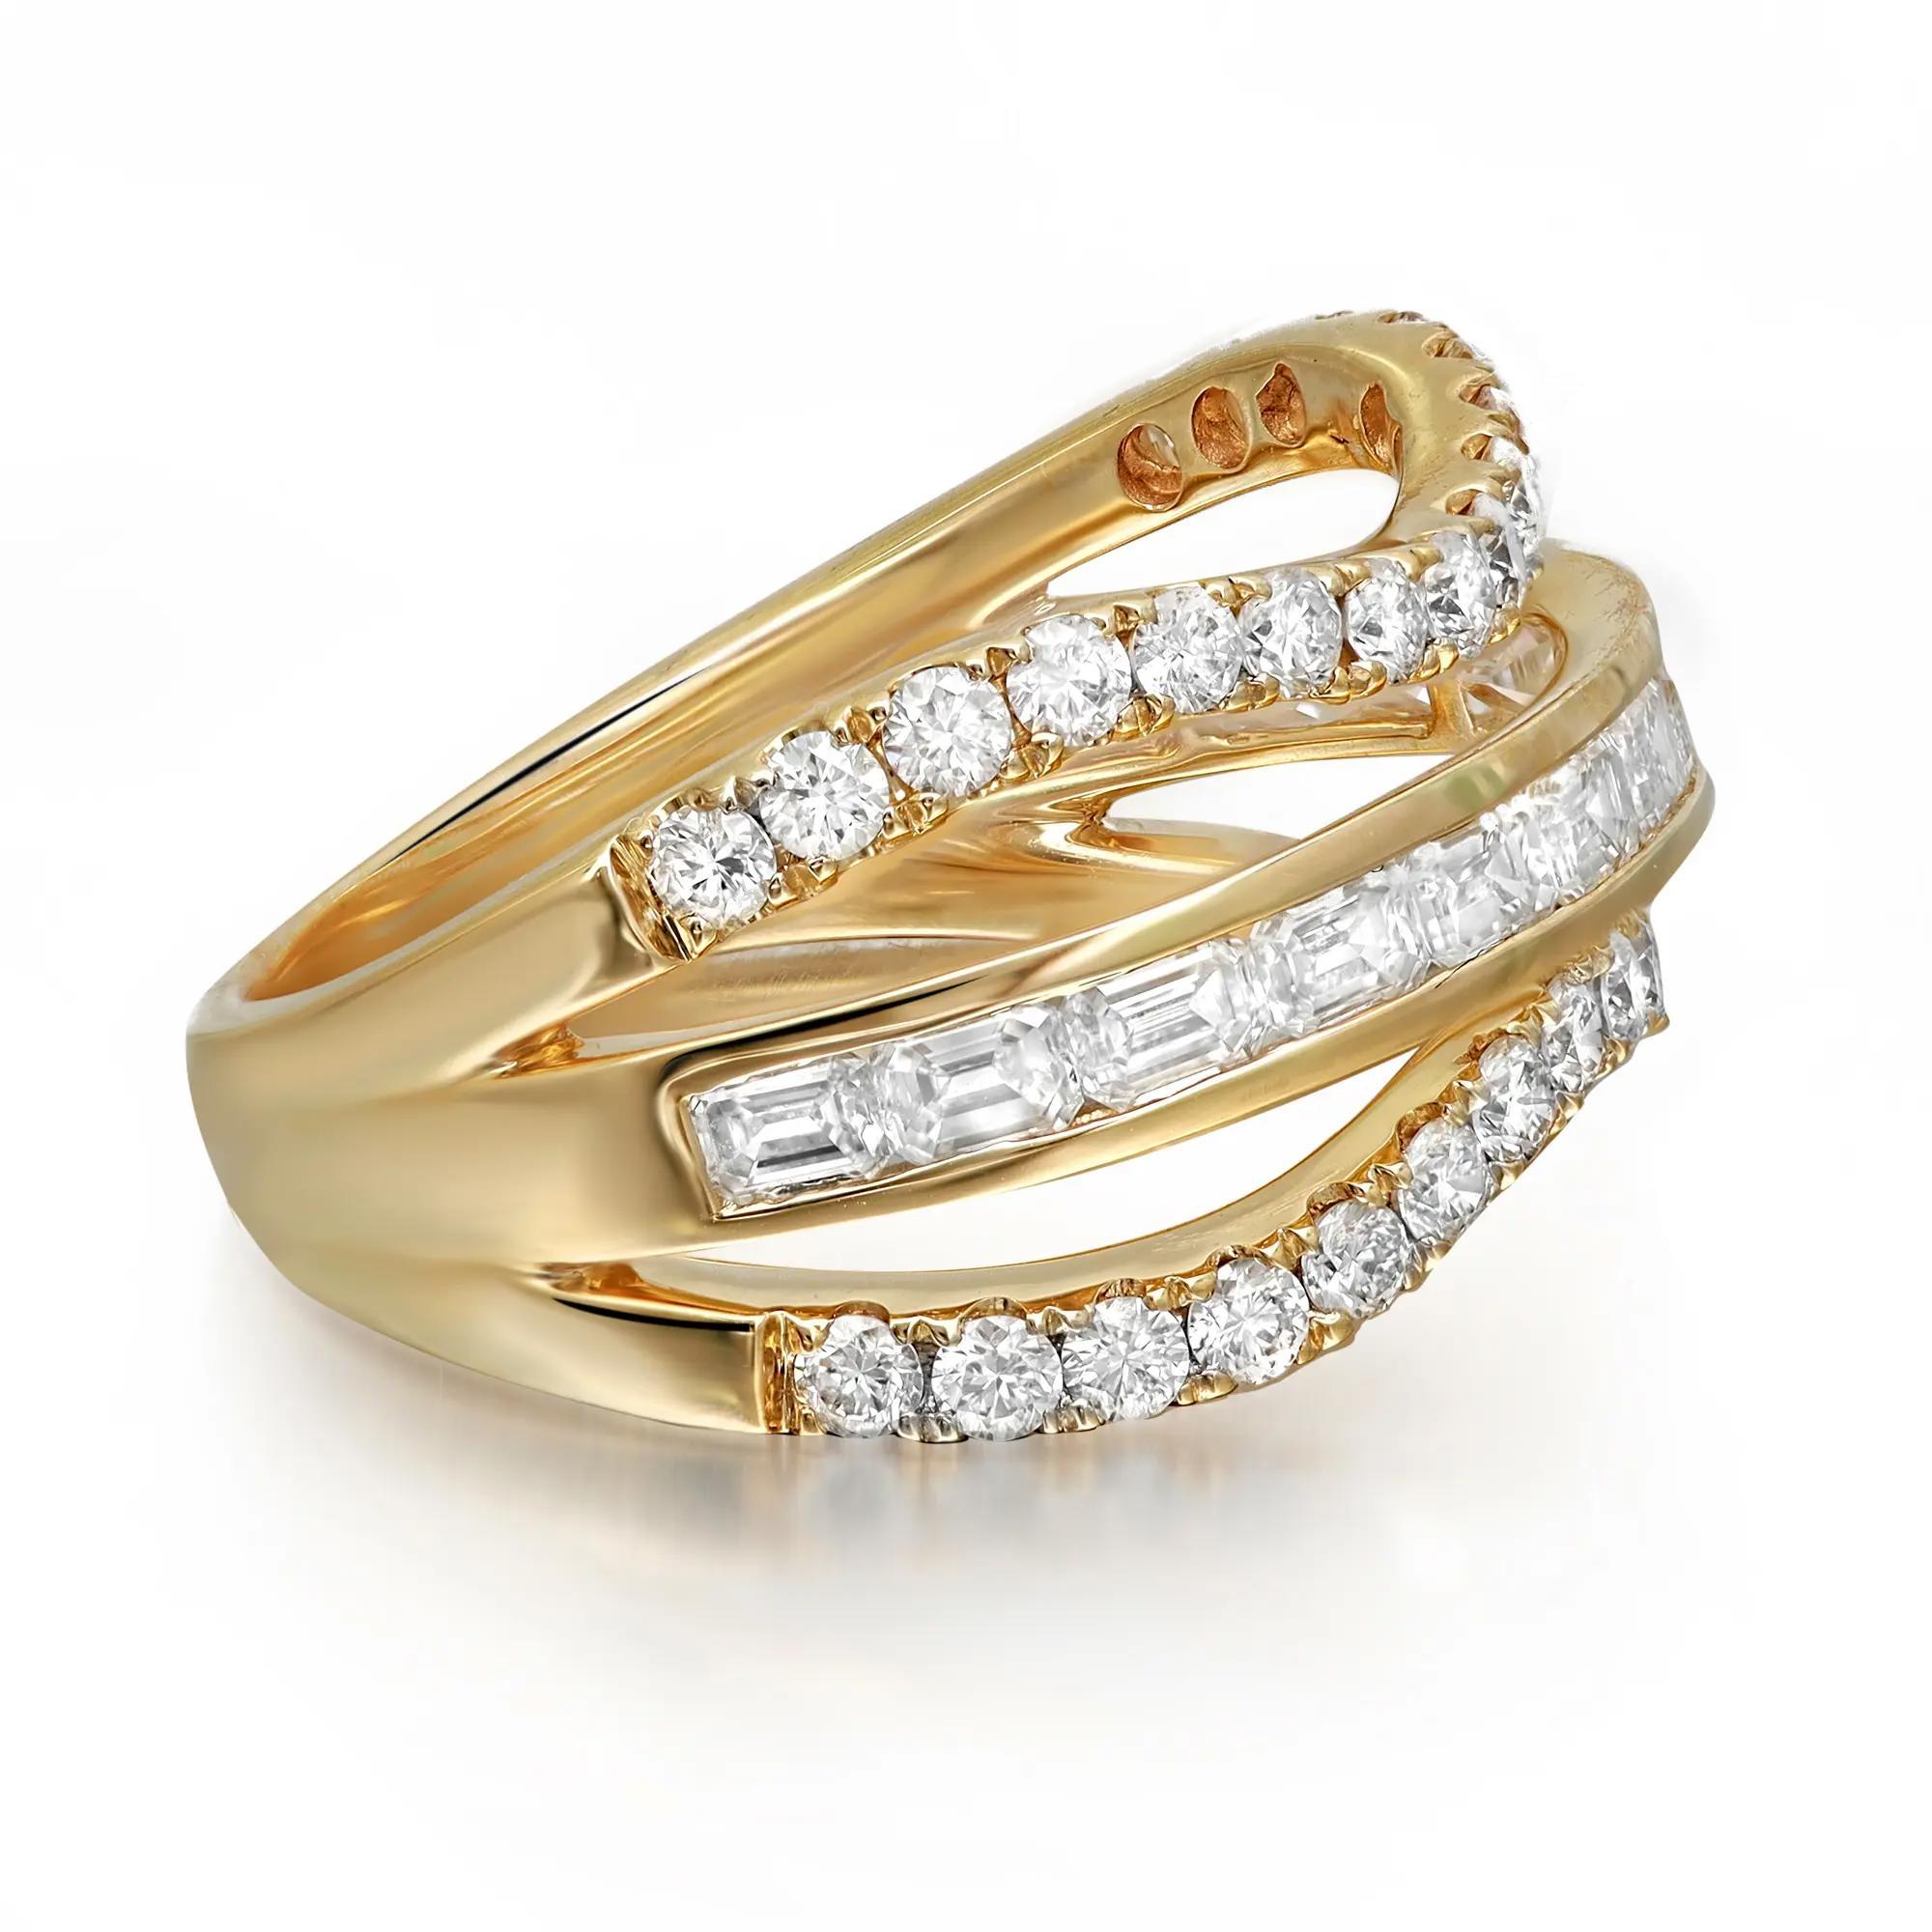 Shimmering and elegant, this diamond band ring is perfect for any occasion. Crafted in lustrous 18K yellow gold. This beautiful ring is adorned with channel set emerald cut diamonds in the center with two curved rows of round brilliant cut diamonds.